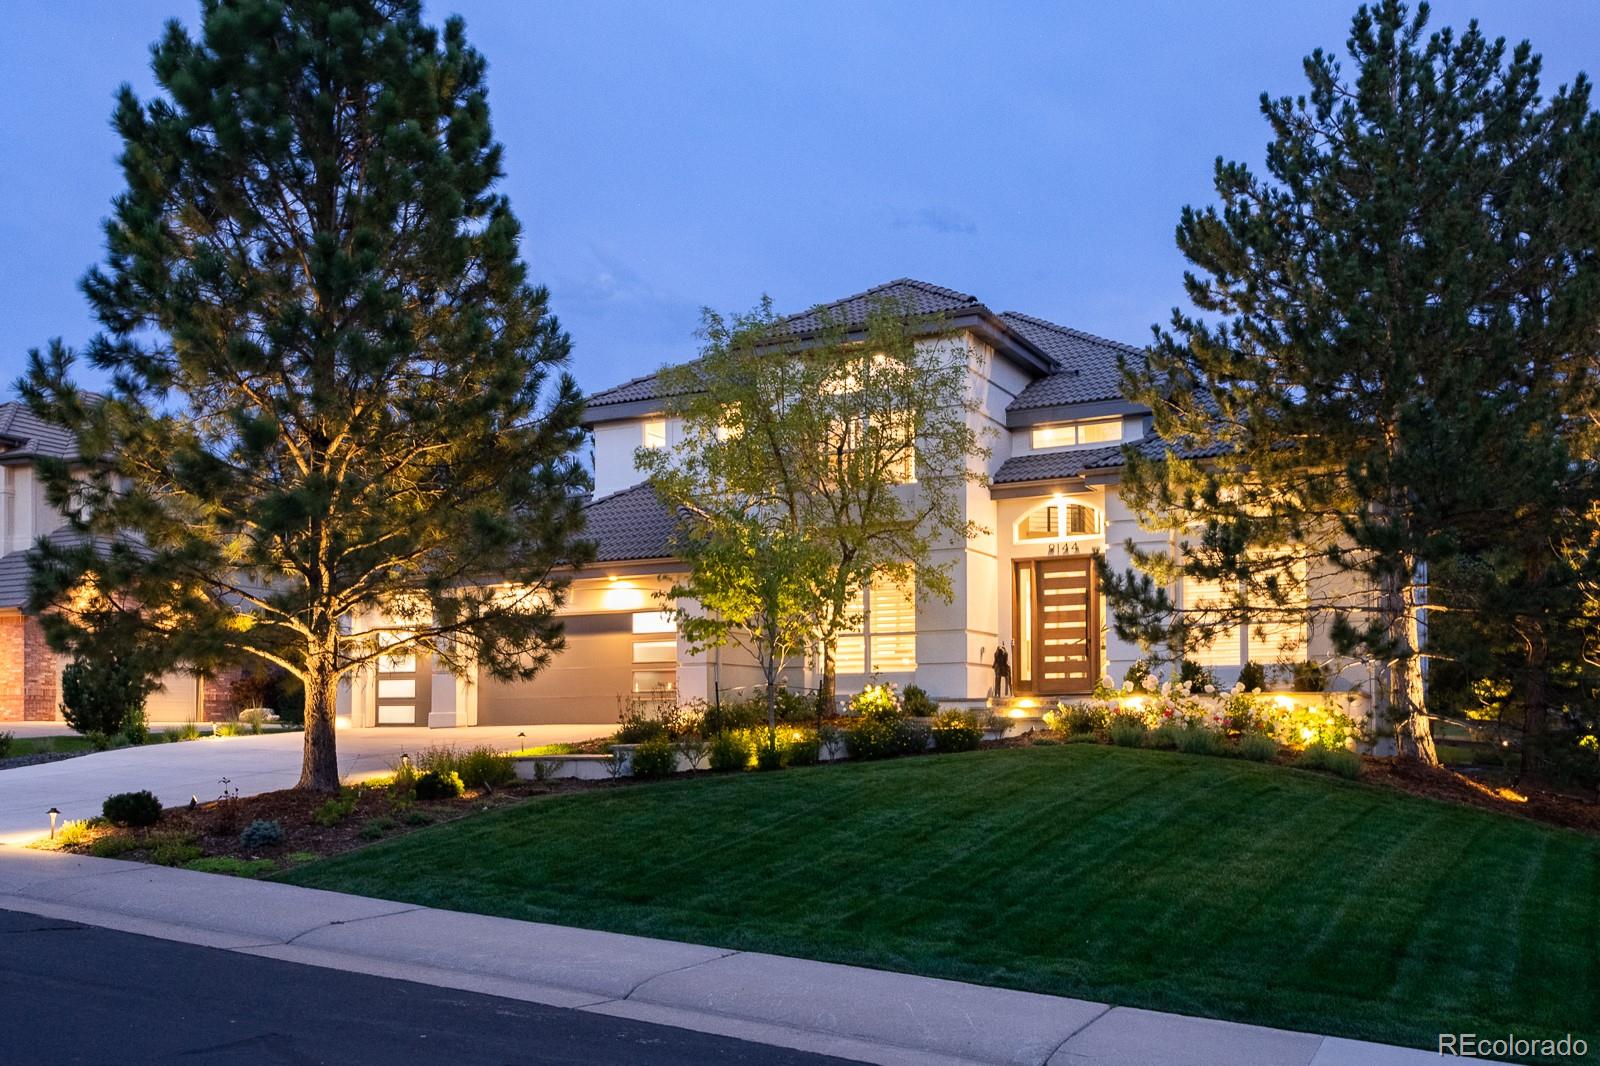 9144 E Star Hill Trail, lone tree MLS: 2050151 Beds: 3 Baths: 5 Price: $1,850,000